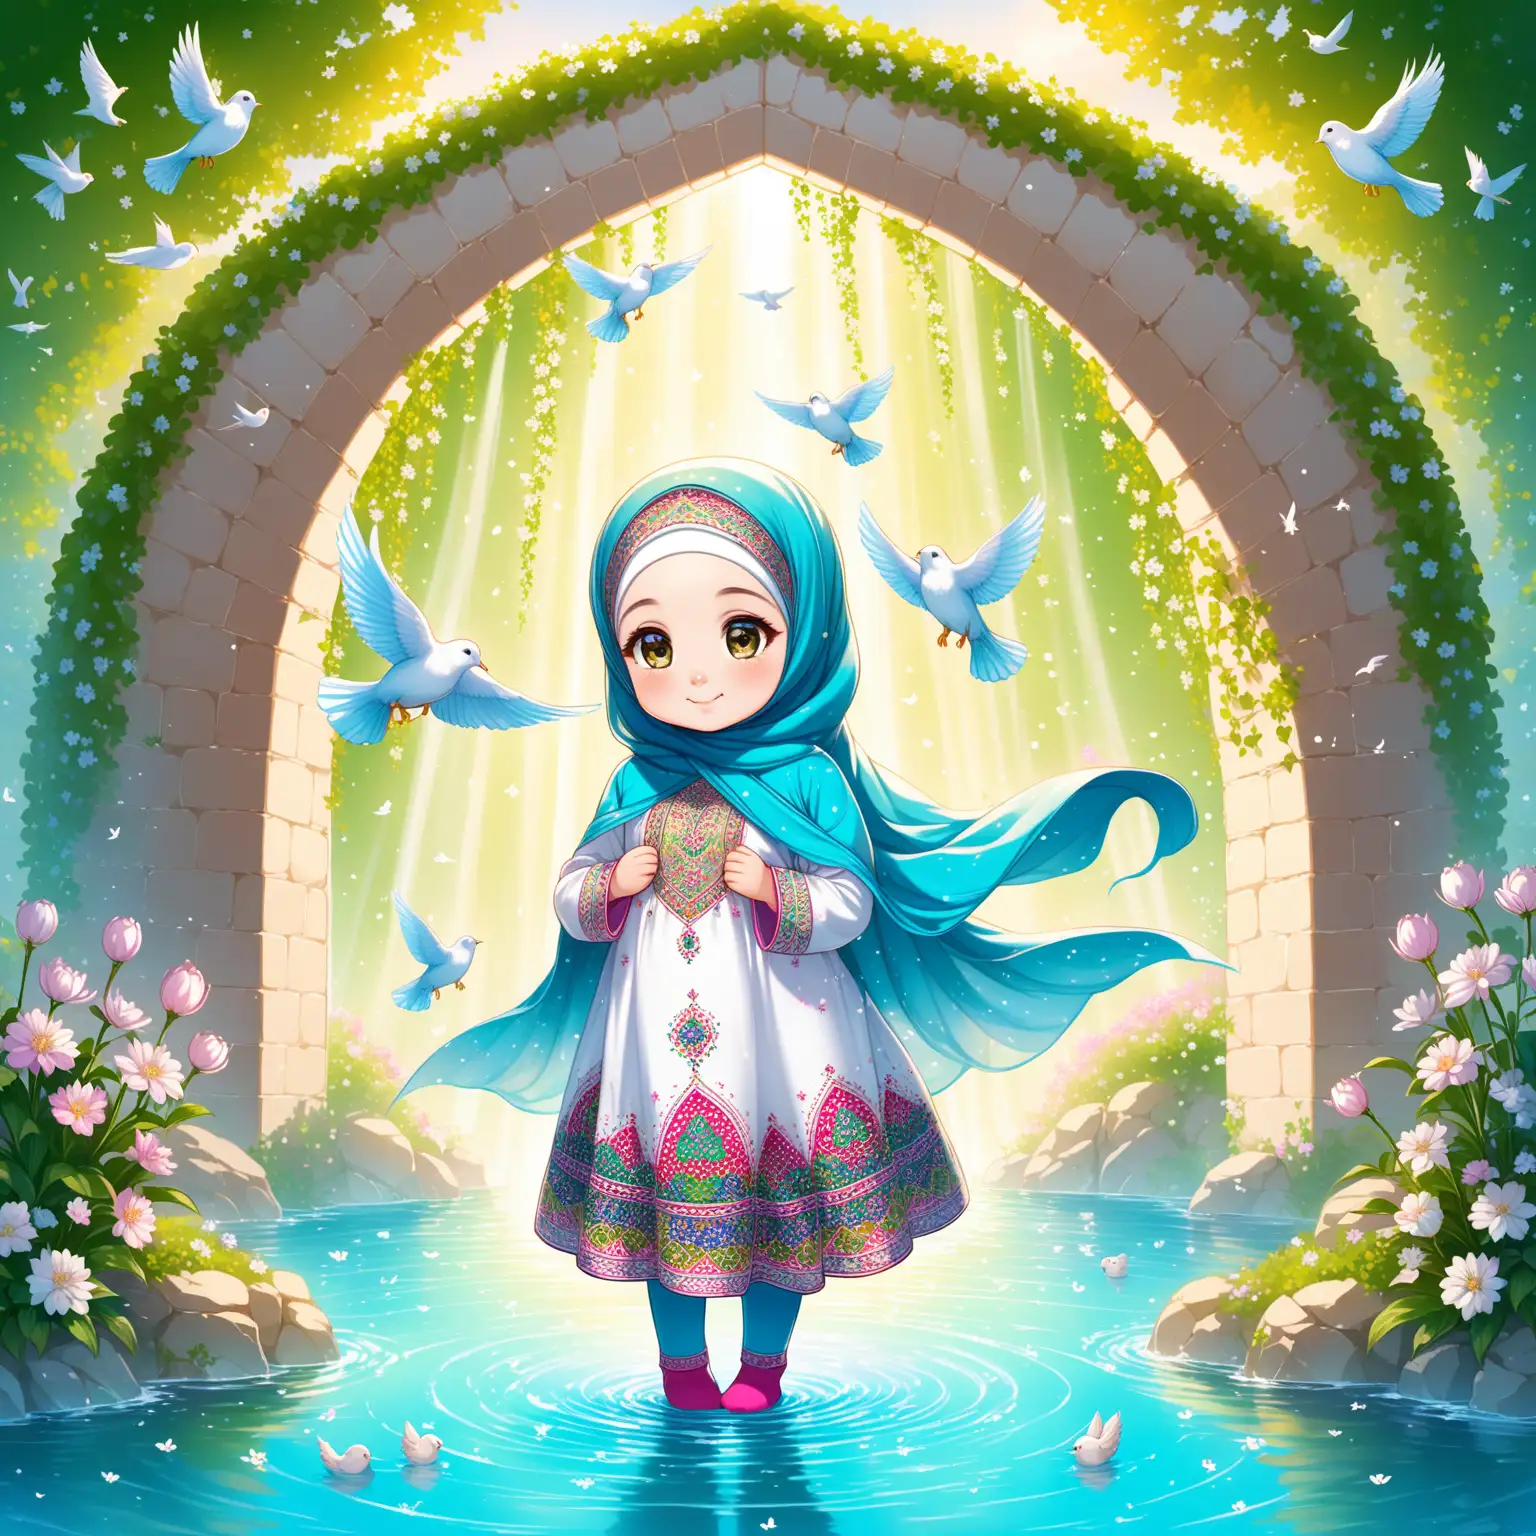 Character Persian little girl(full height, Muslim, with emphasis no hair out of veil(Hijab), baby face, smaller eyes, bigger nose, white skin, cute, smiling, wearing socks, clothes full of Persian designs, heavenly girl).

Atmosphere flowing water from the spring with flowers, nightingales and flying birds in spring.